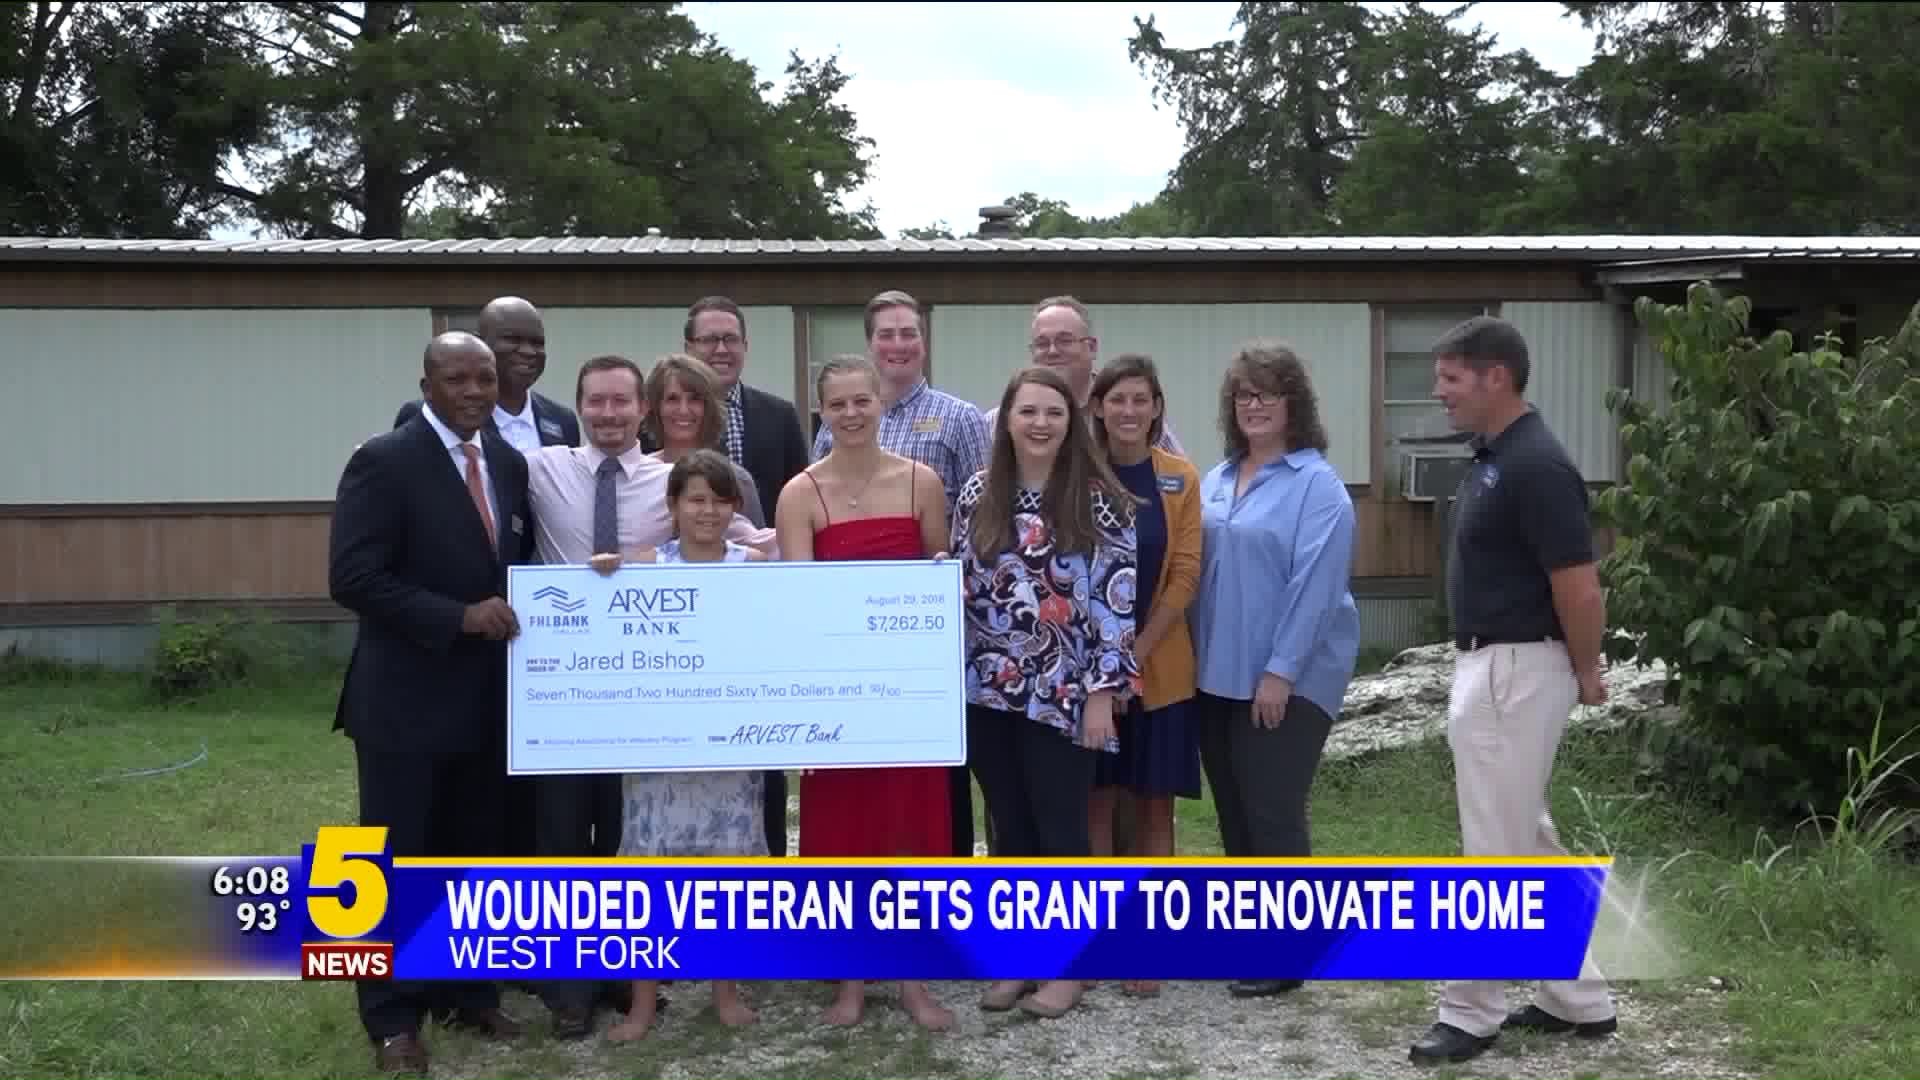 Wounded Veteran Gets Grant To Renovate Home